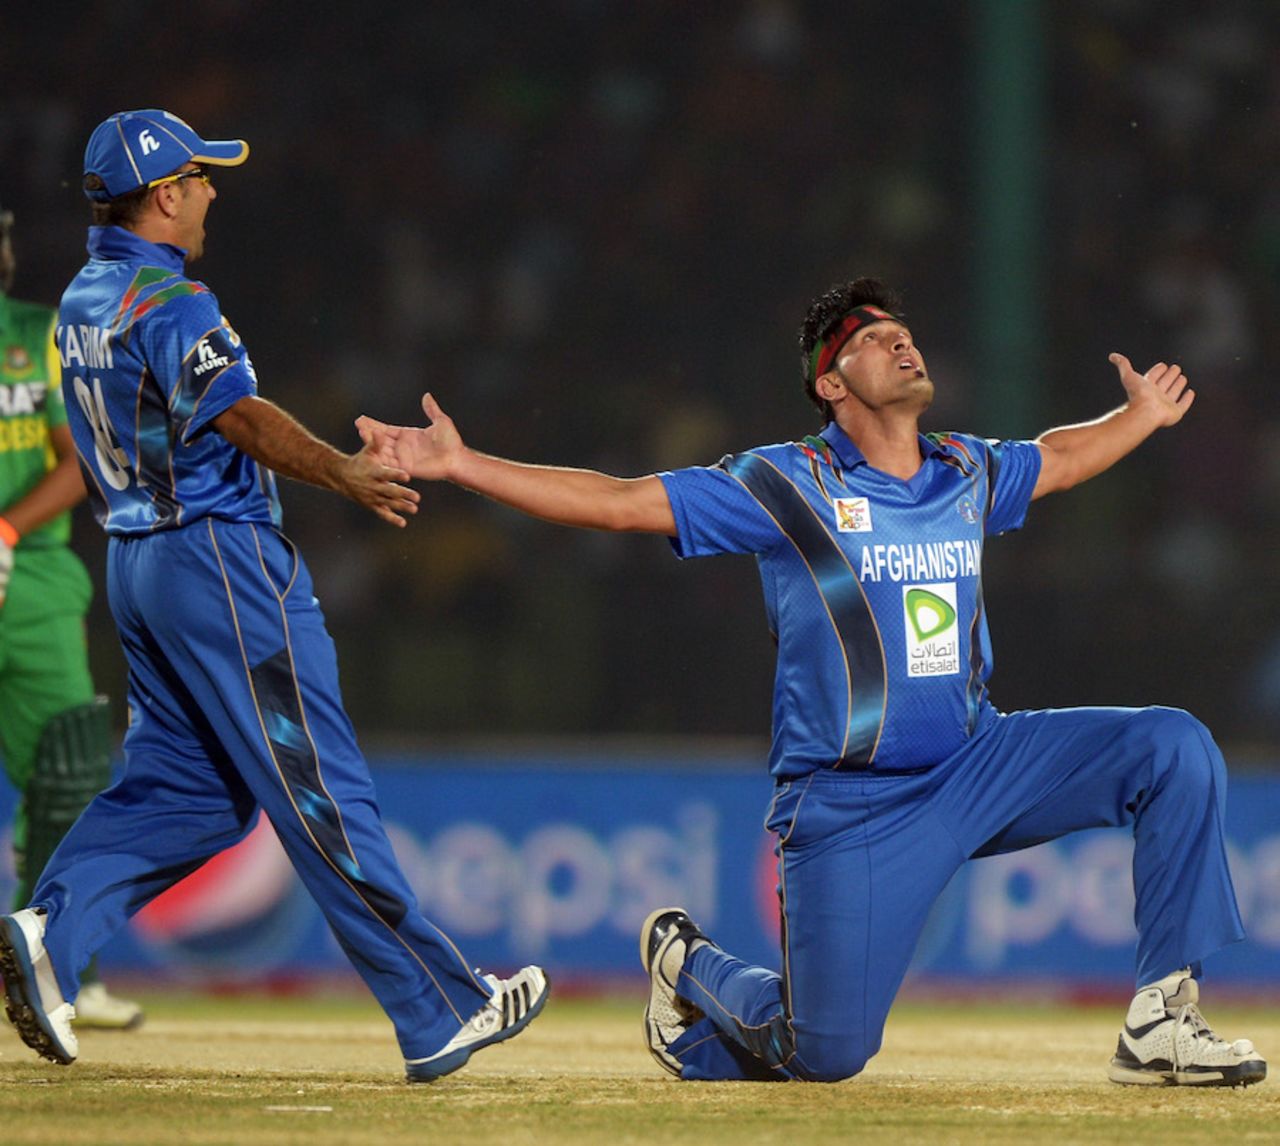 Hamid Hassan celebrates the wicket of Anamul Haque, Bangladesh v Afghanistan, Asia Cup, Fatullah, March 1, 2014